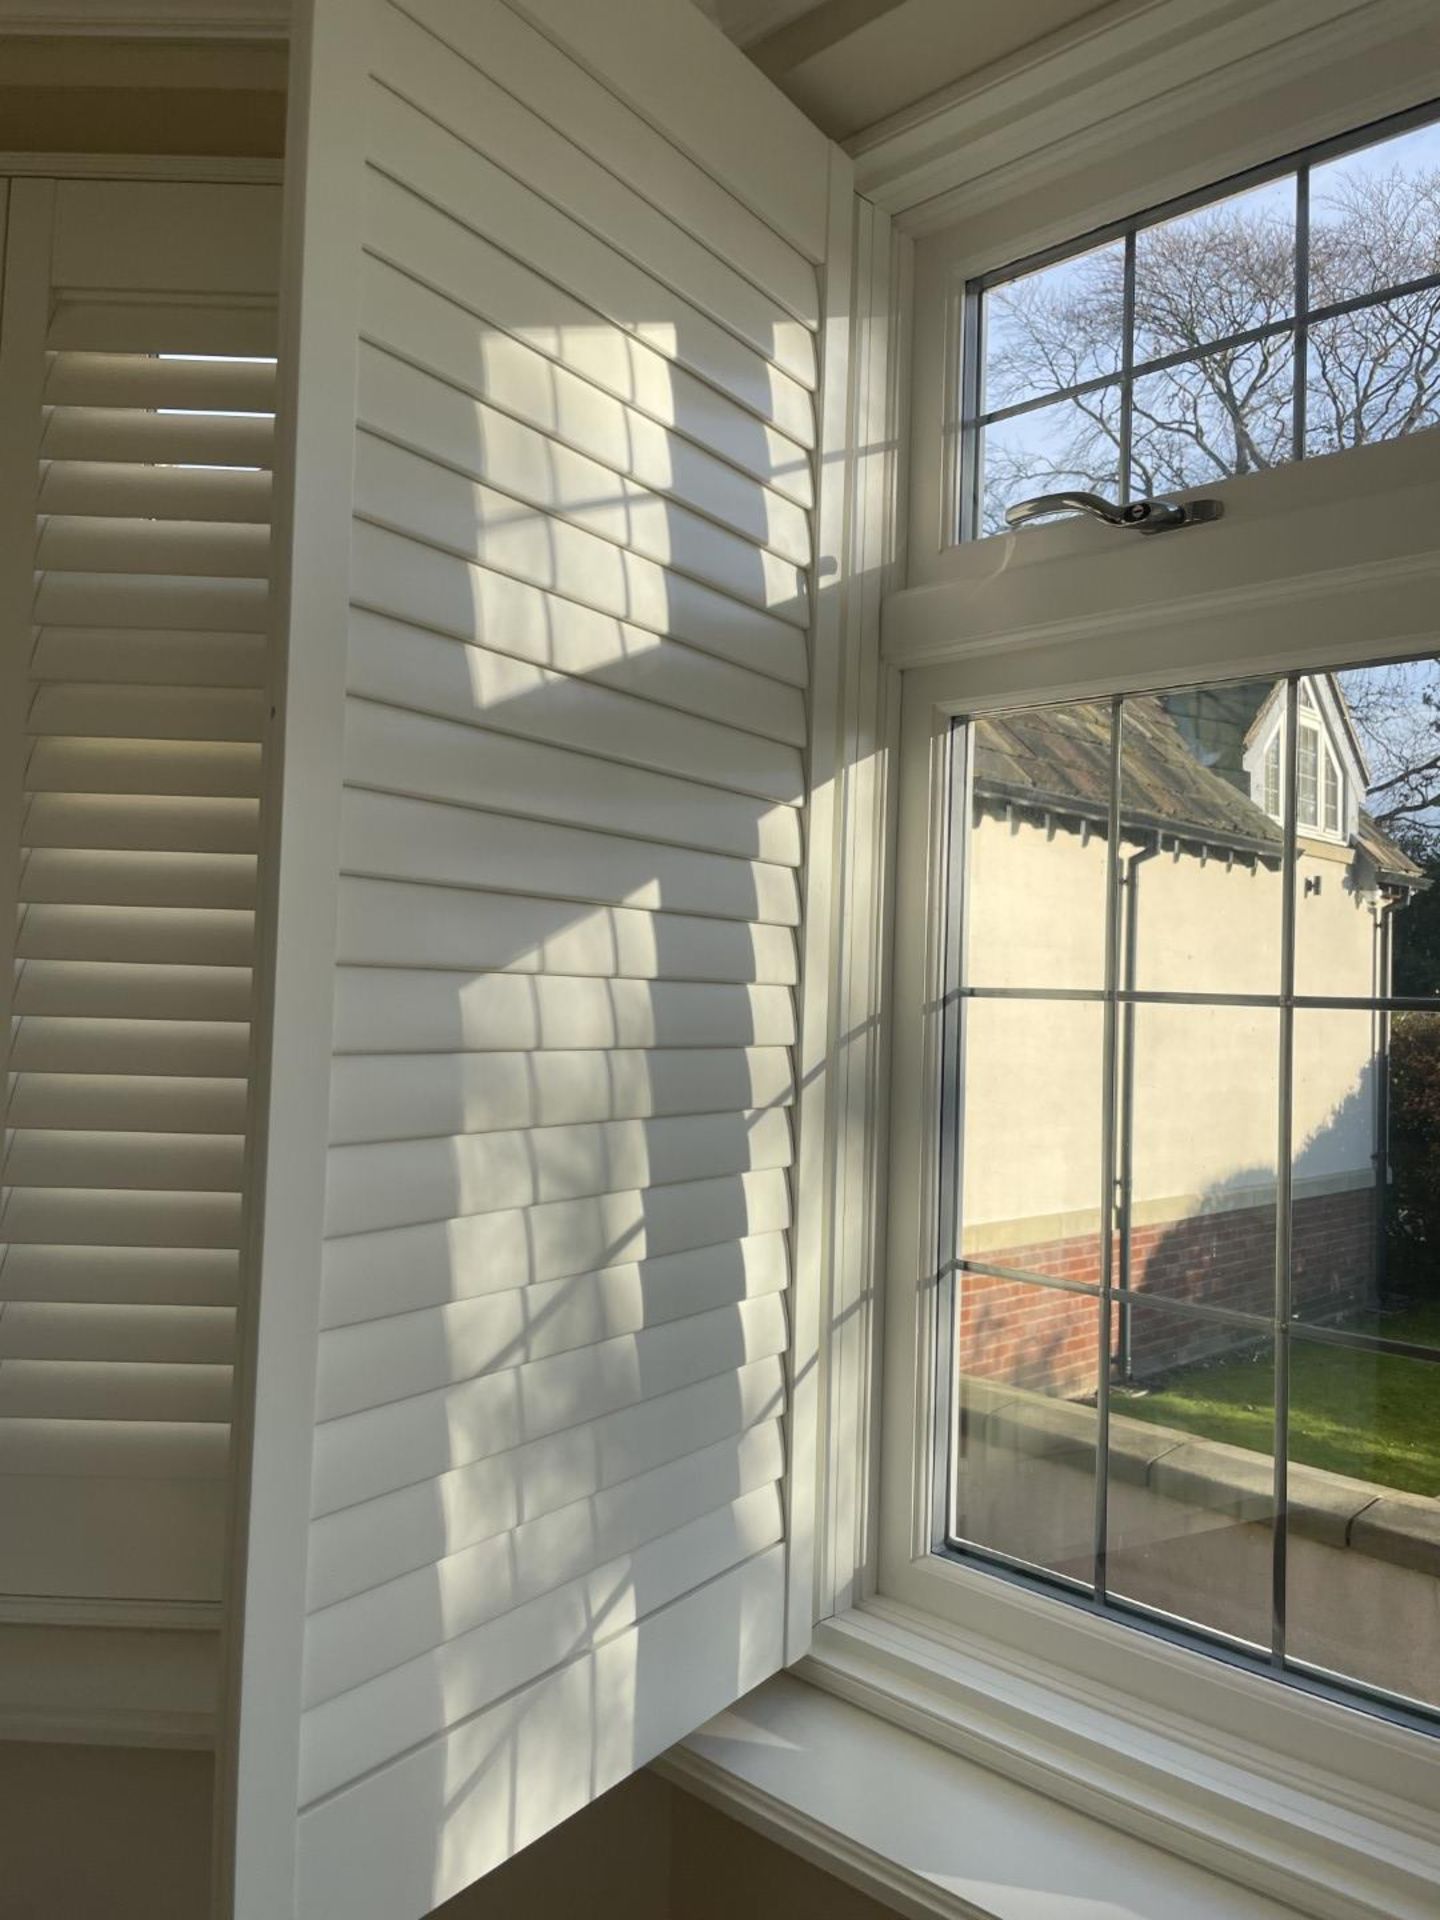 1 x Hardwood Timber Double Glazed Window Frames fitted with Shutter Blinds, In White - Ref: PAN101 - Image 6 of 23